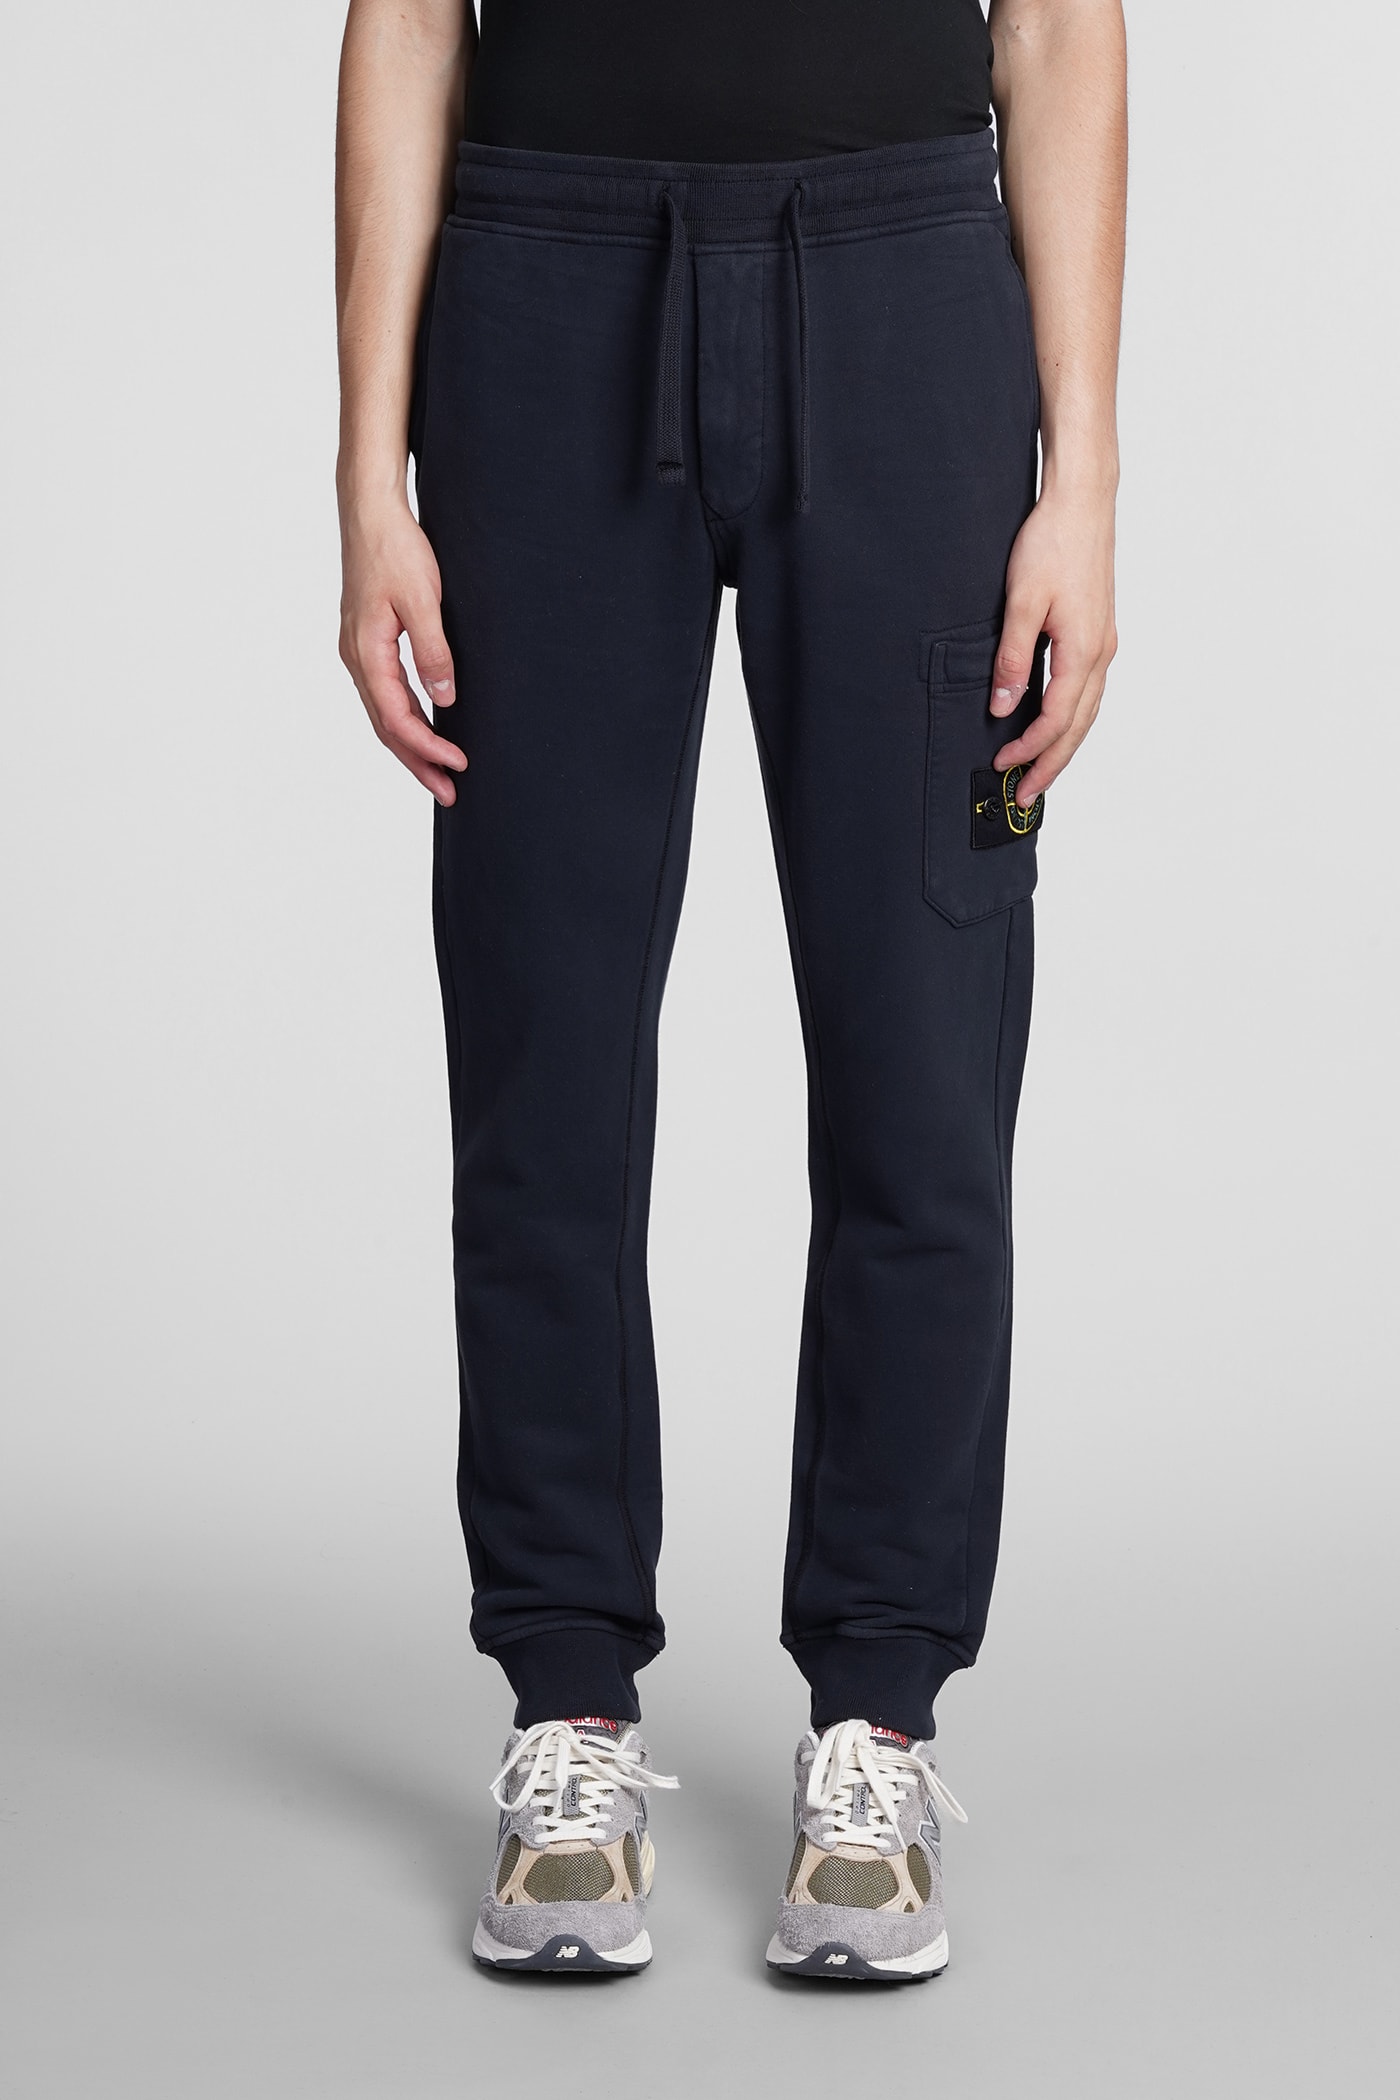 Stone Island Pants In Blue Cotton